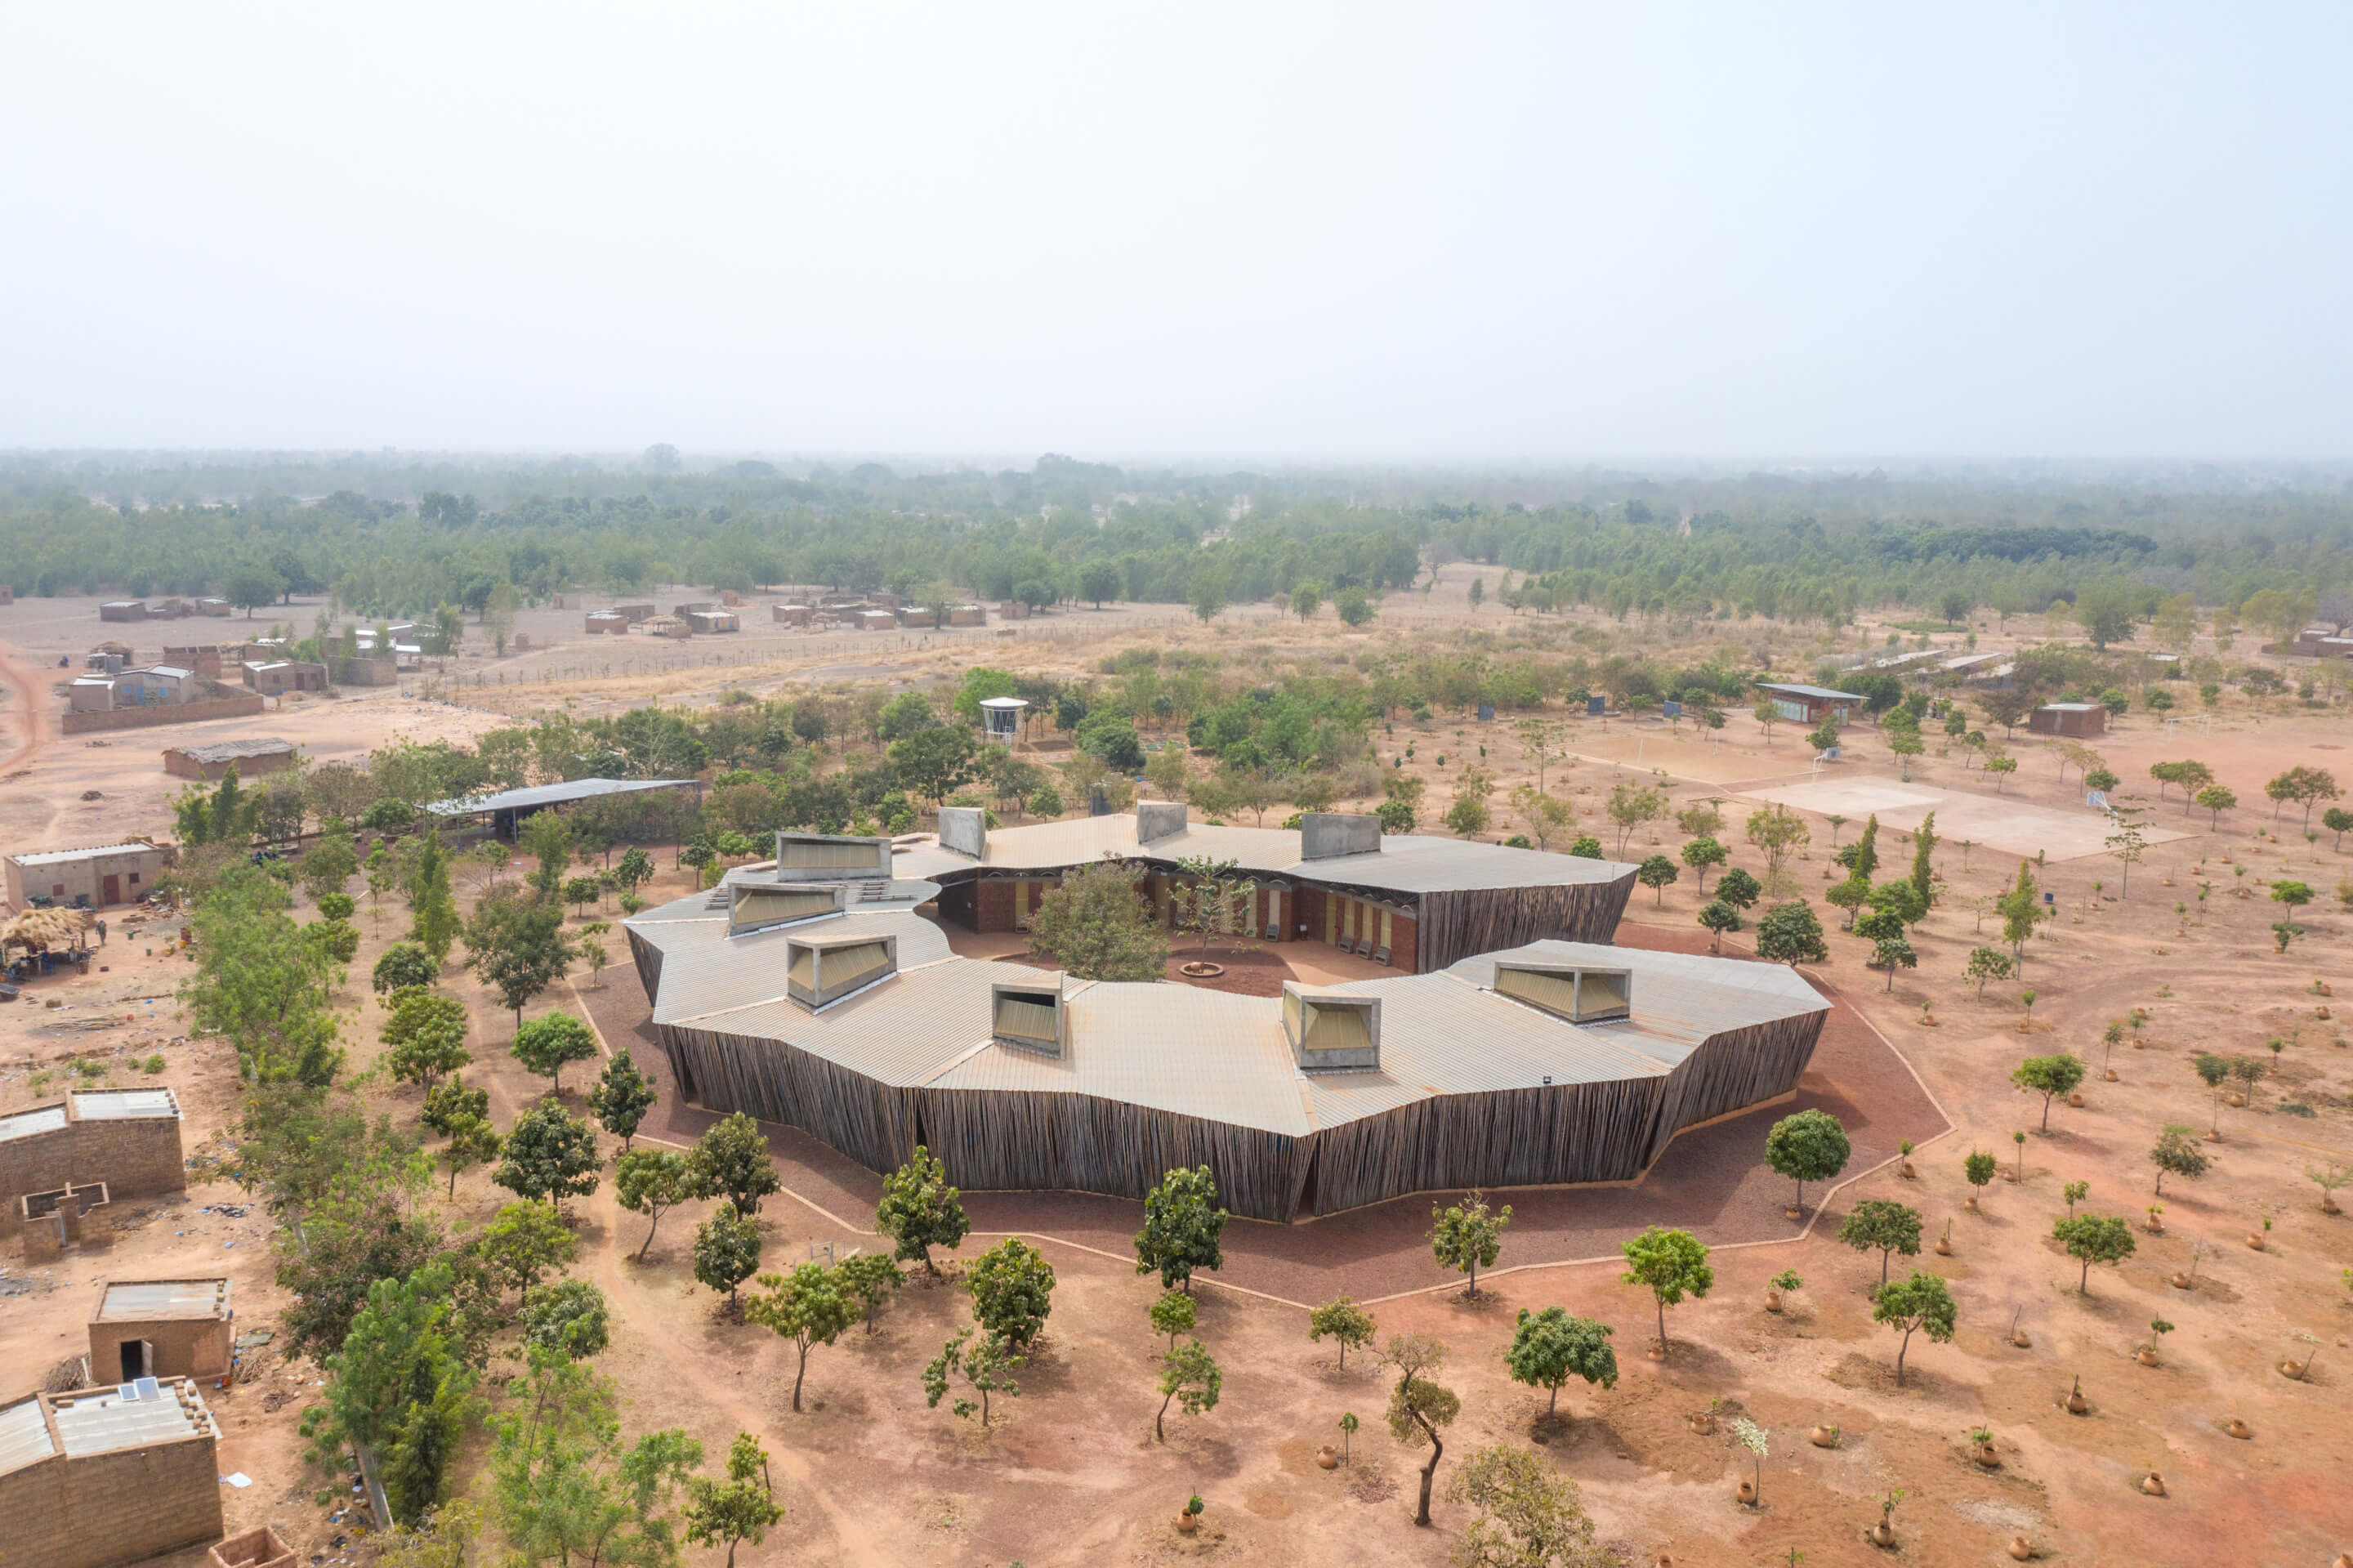 aerial view of a school campus in rural africa